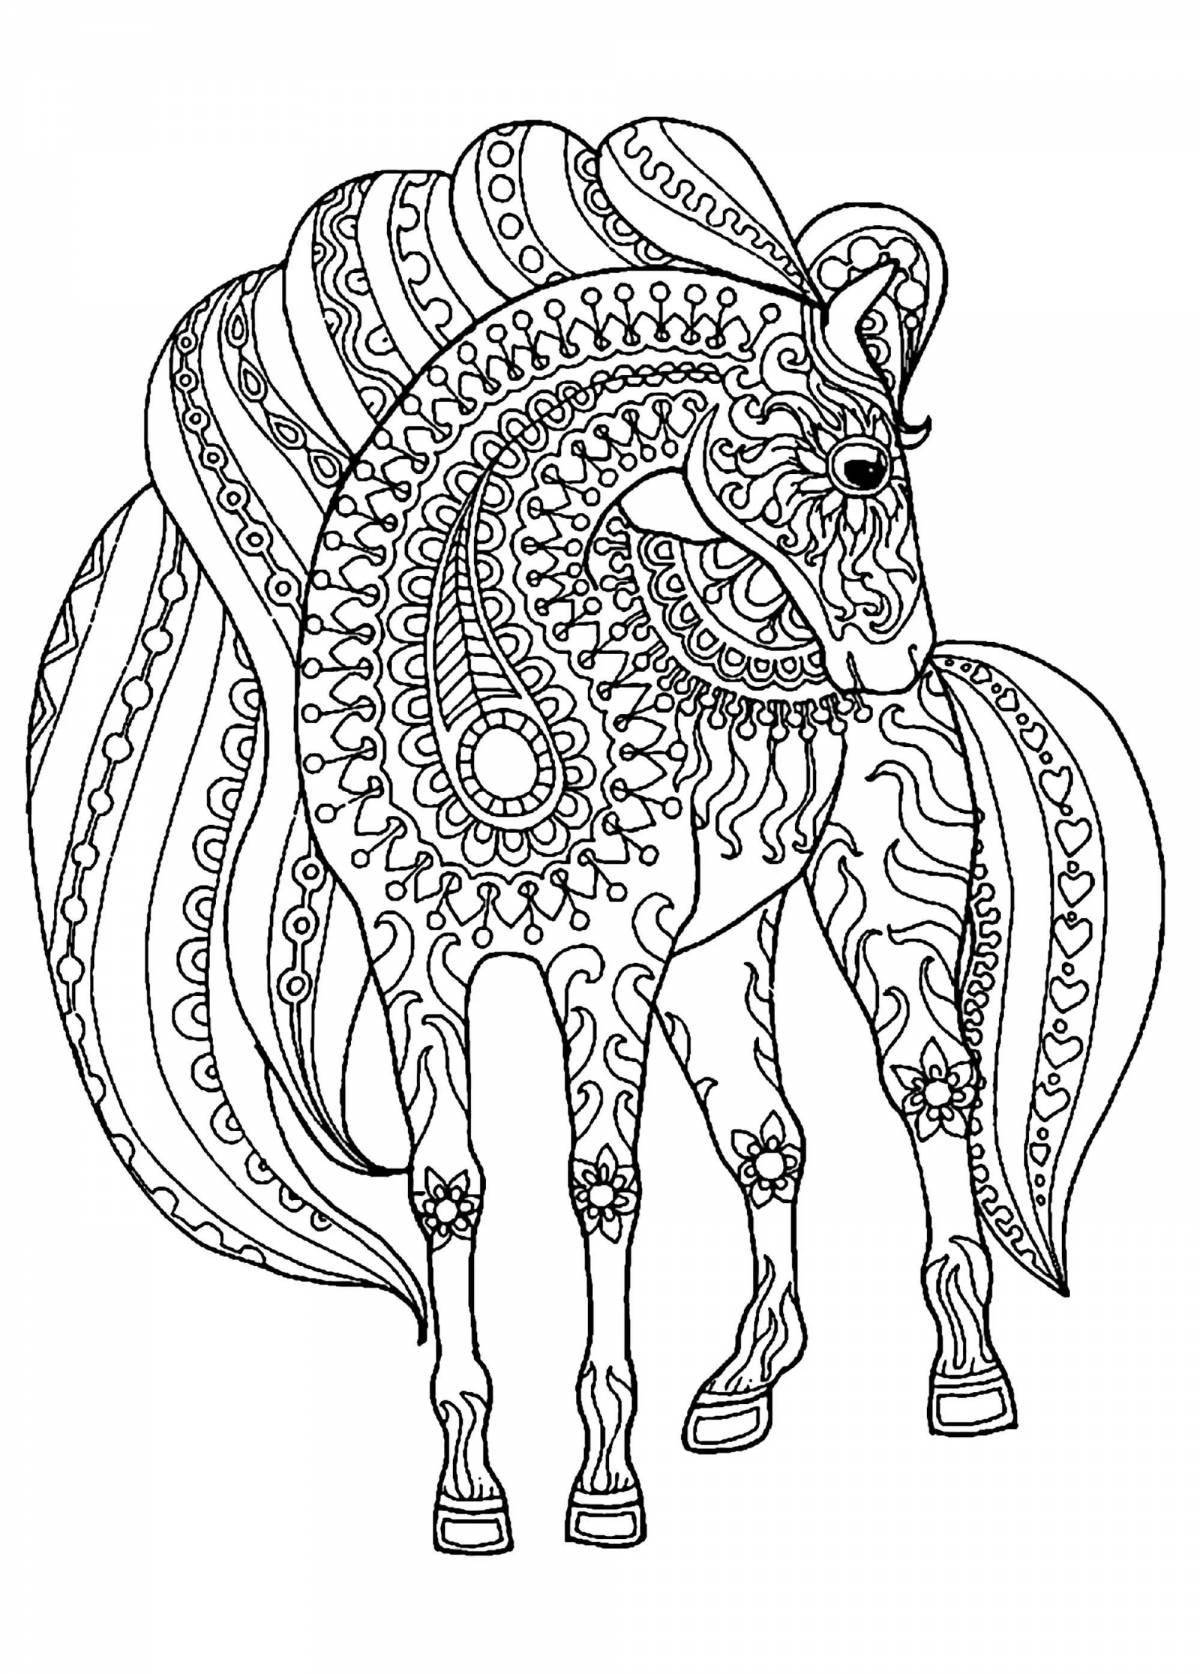 Detailed animal coloring with pattern